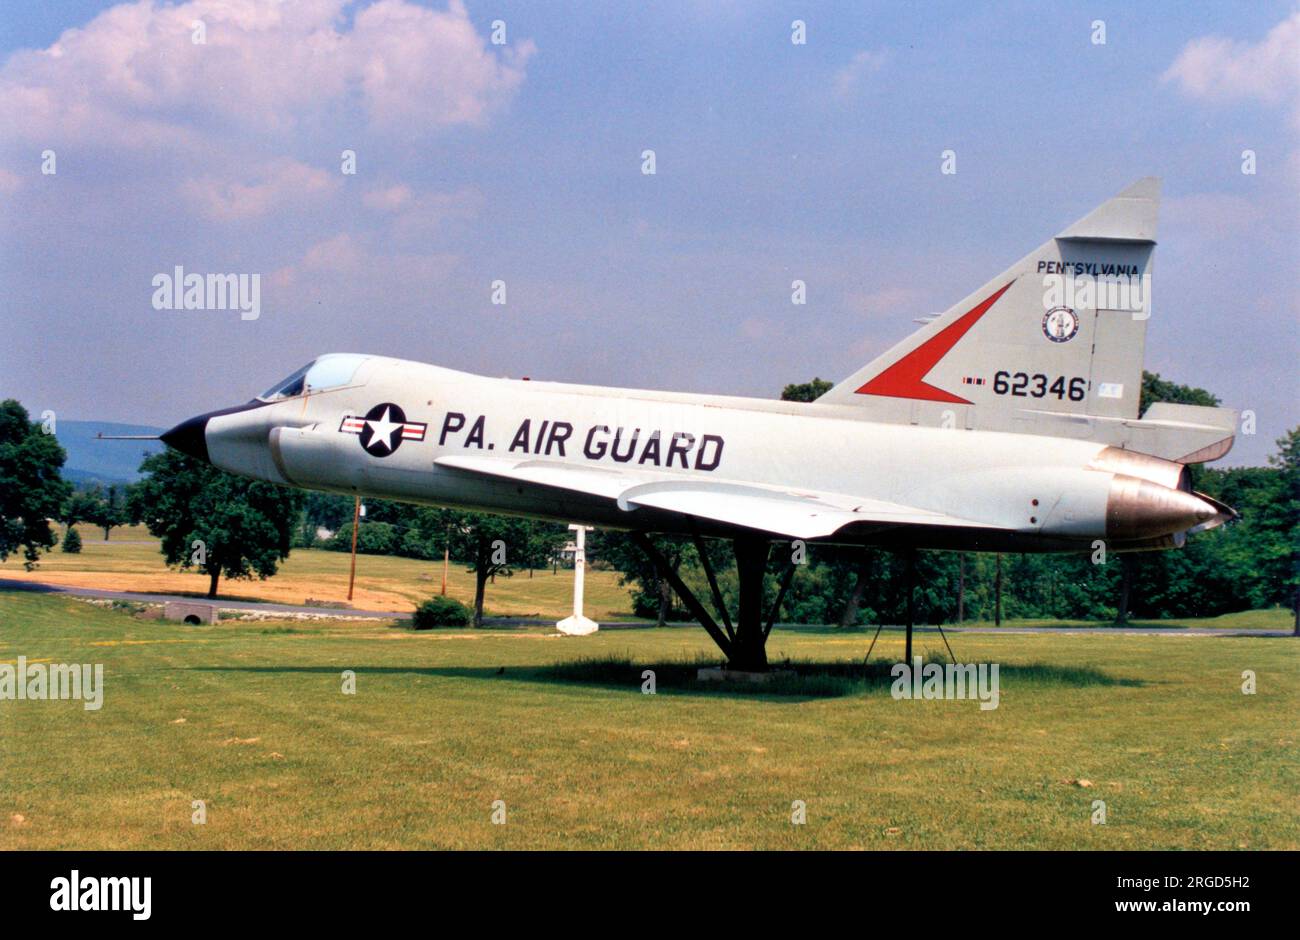 Convair TF-102A Delta Dagger 56-2346 (msn 8-12-78), mounted on a plinth at the Pennsylvania National Guard Military Museum, Annville, PA 17003, United States. Stock Photo